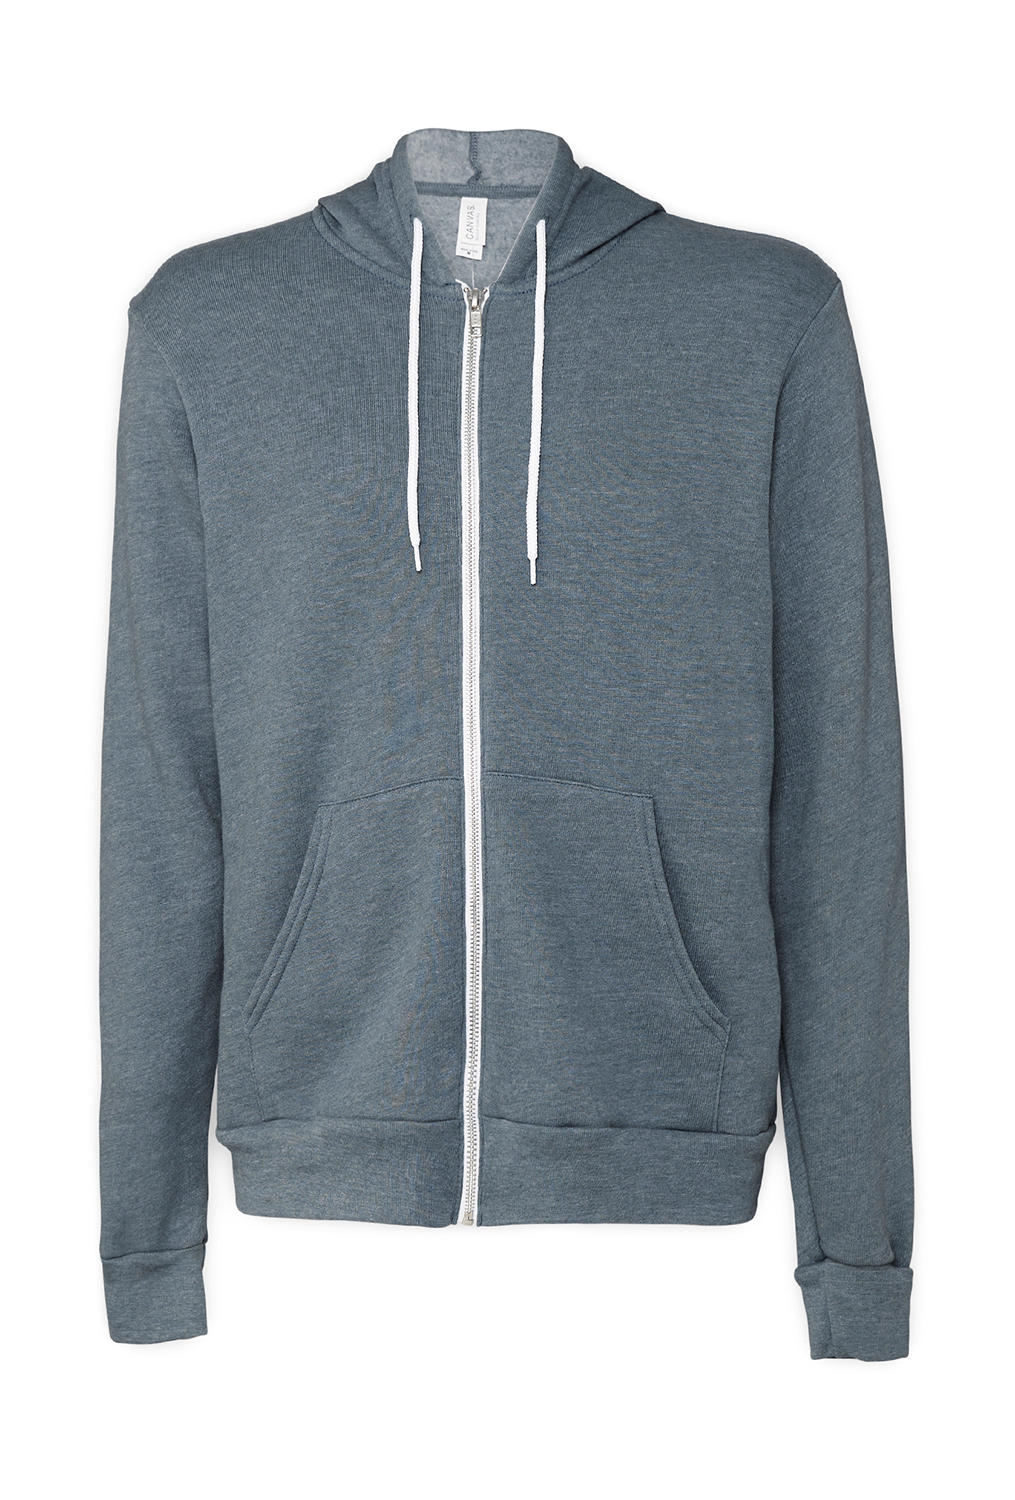  Unisex Poly-Cotton Full Zip Hoodie in Farbe Heather Slate